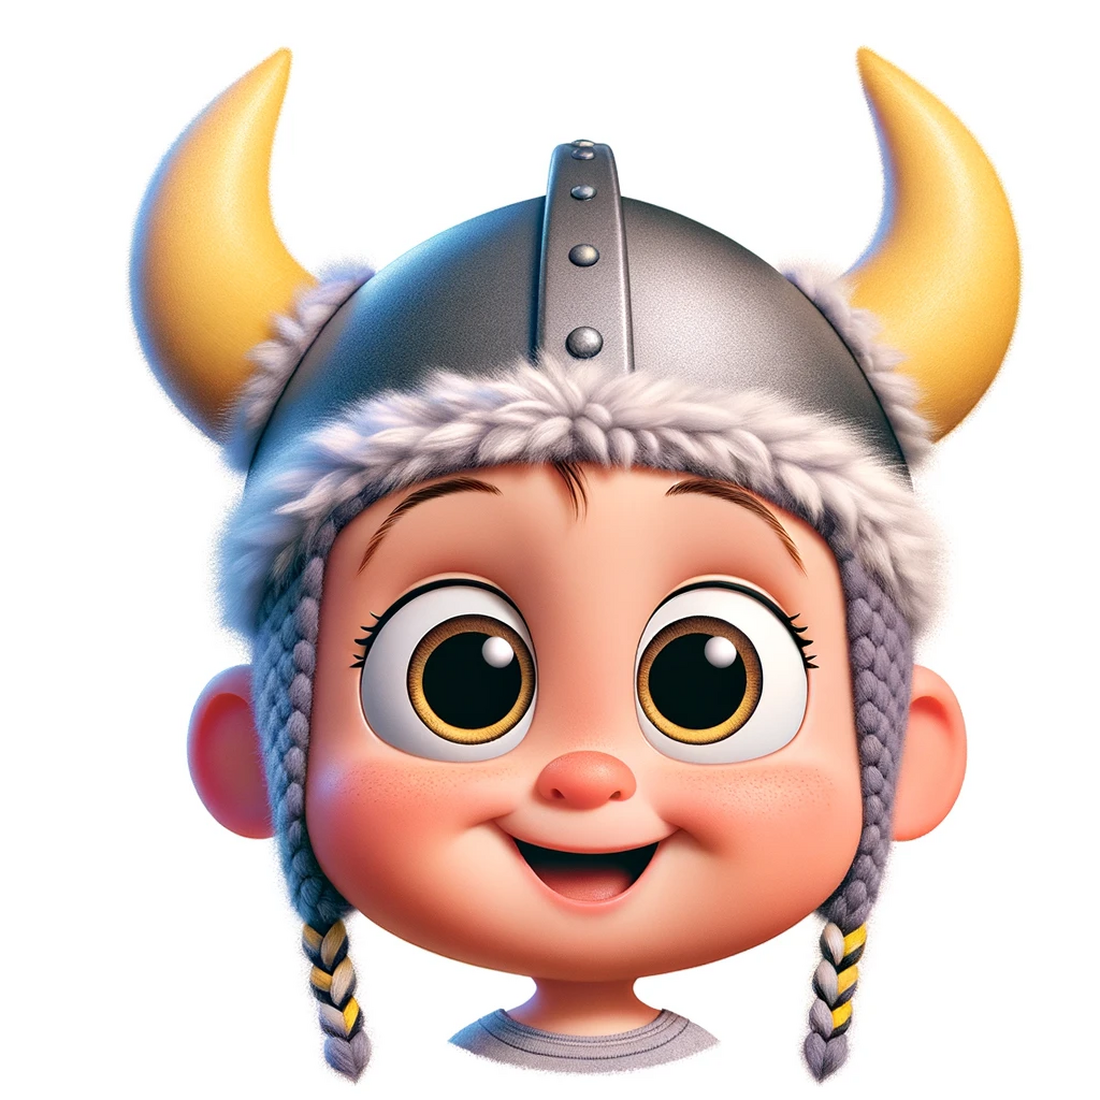 AI art of a young girl with a viking hat on, in a cartoon style